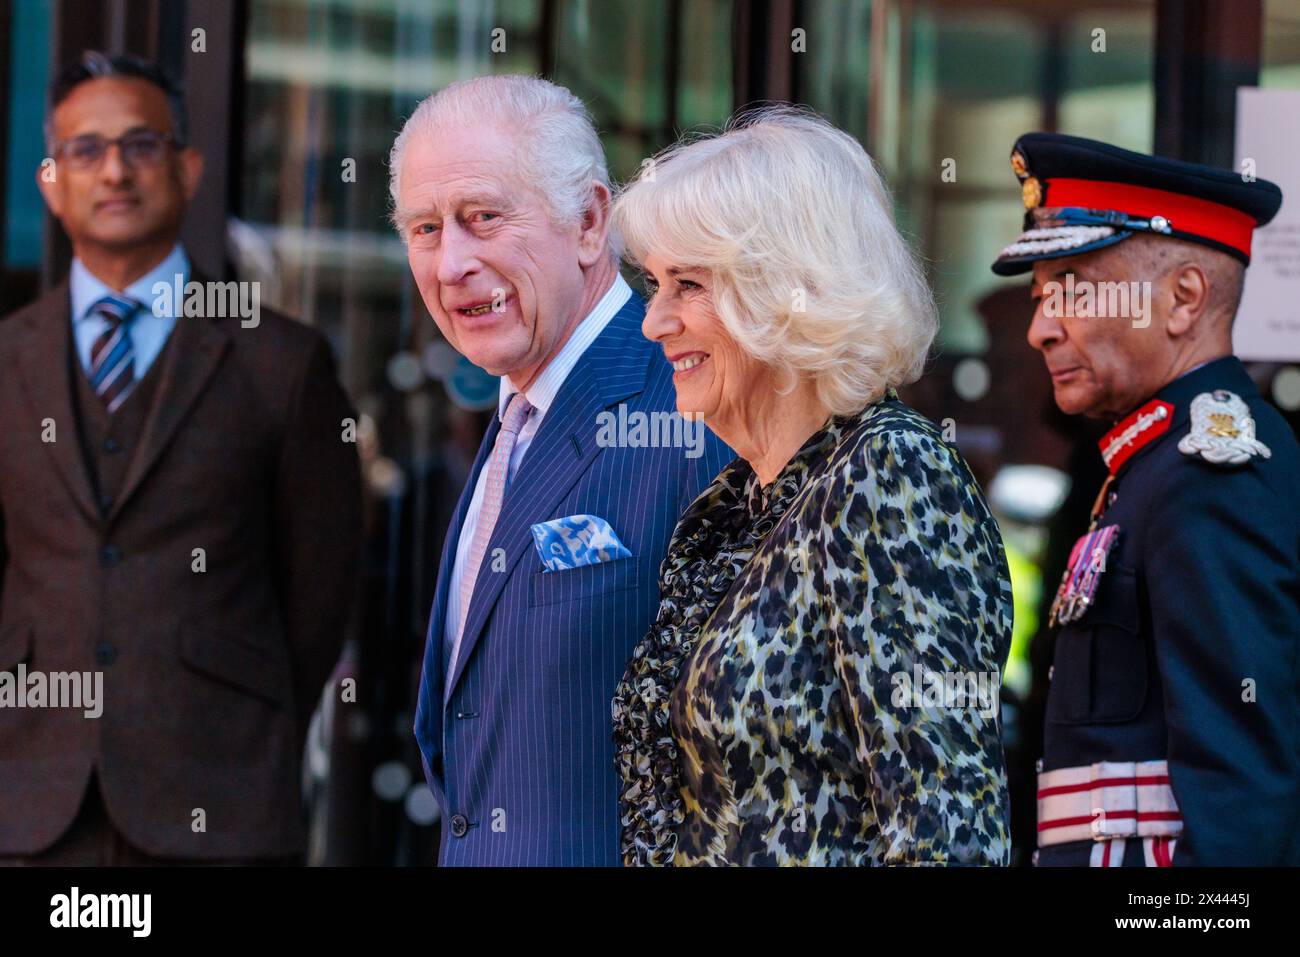 University College Hospital, London, UK. 30th April 2024. His Majesty, King Charles III, Patron of Cancer Research UK and Macmillan Cancer Support, and Queen Camilla visit University College Hospital Macmillan Cancer Centre, marking The King's first day as the new Patron of Cancer Research UK and his first public engagement since announcing his Cancer diagnosis.  This visit will raise awareness of the importance of early diagnosis and highlight some of the innovative research, supported by Cancer Research UK, which is taking place at the hospital. Photo by Amanda Rose/Alamy Live News Stock Photo